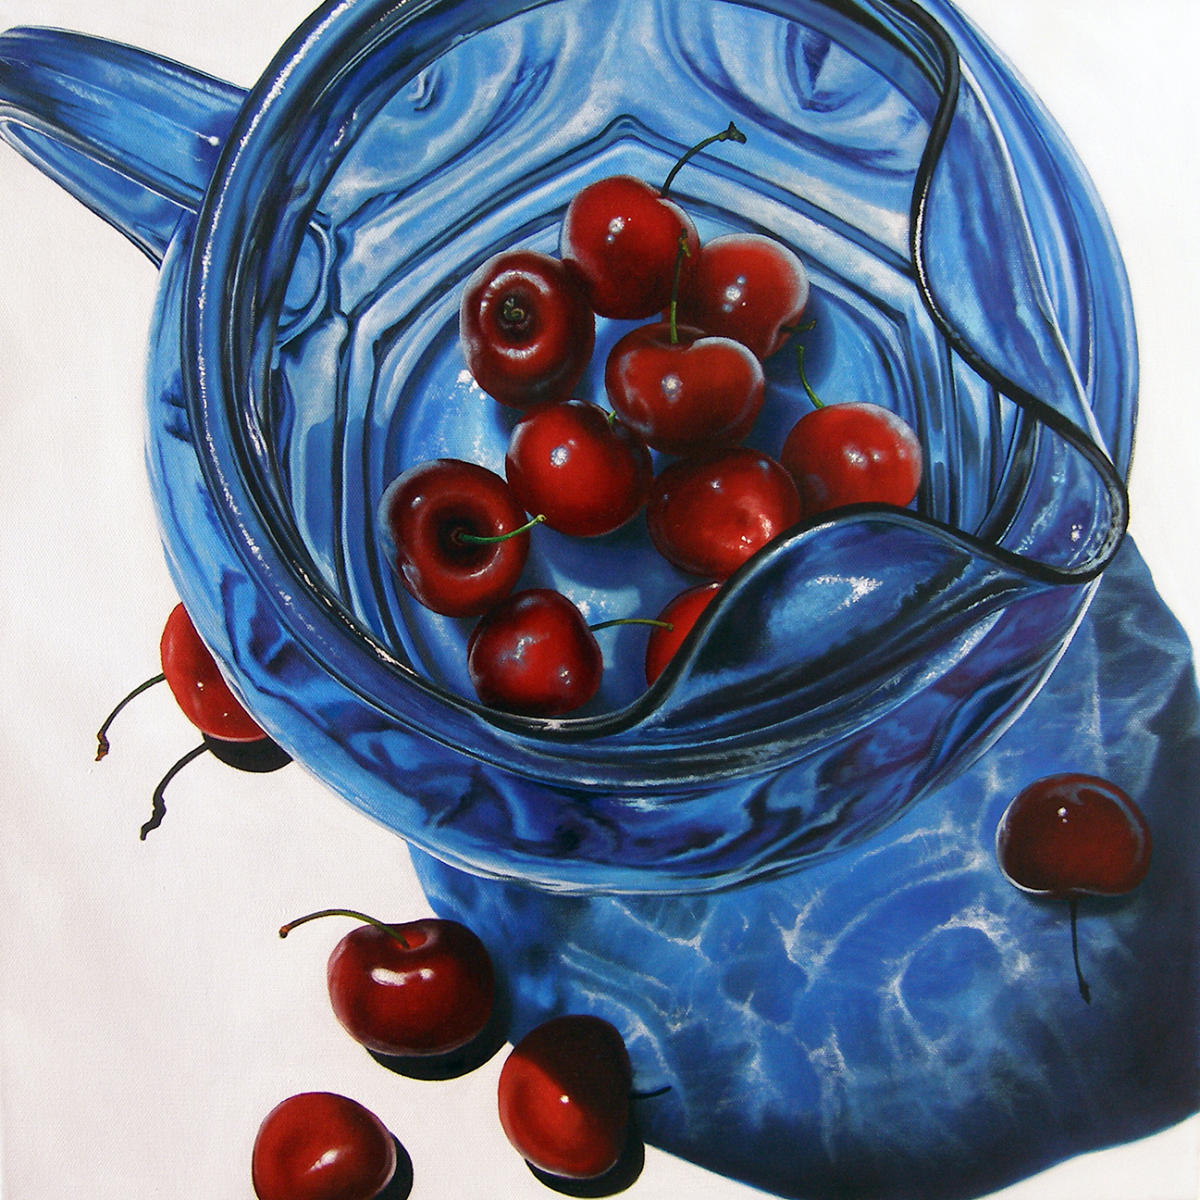 RED & BLUE - 20"x20" - OIL ON CANVAS - PRIVATE COLLECTION